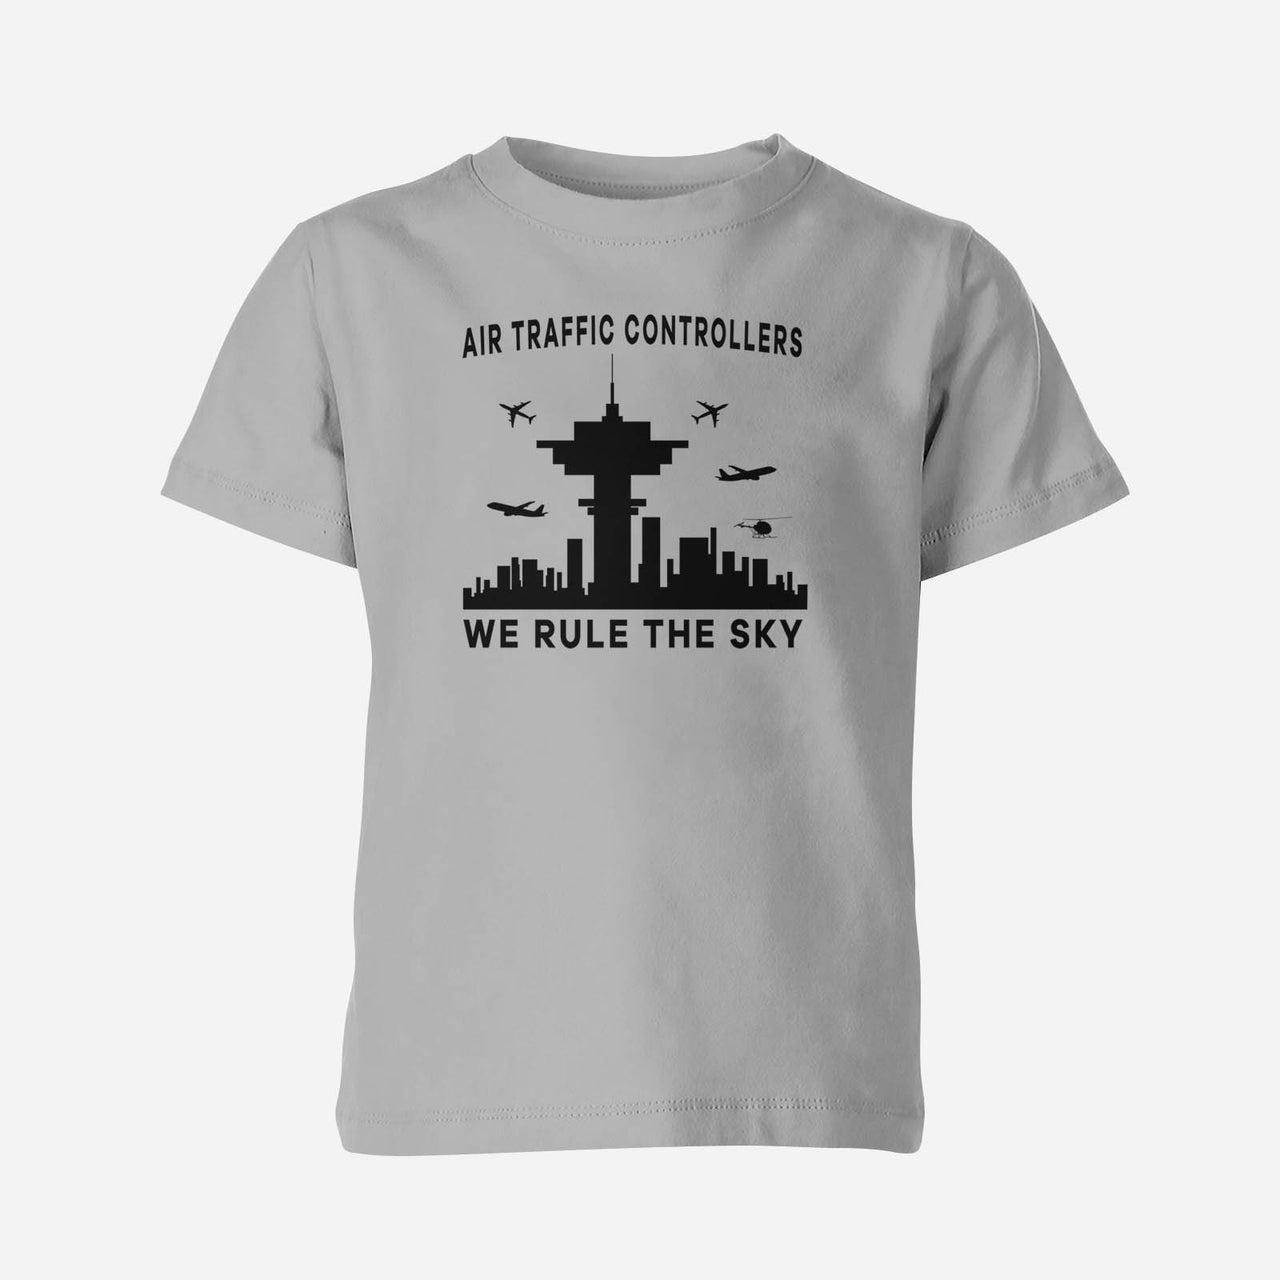 Air Traffic Controllers - We Rule The Sky Designed Children T-Shirts